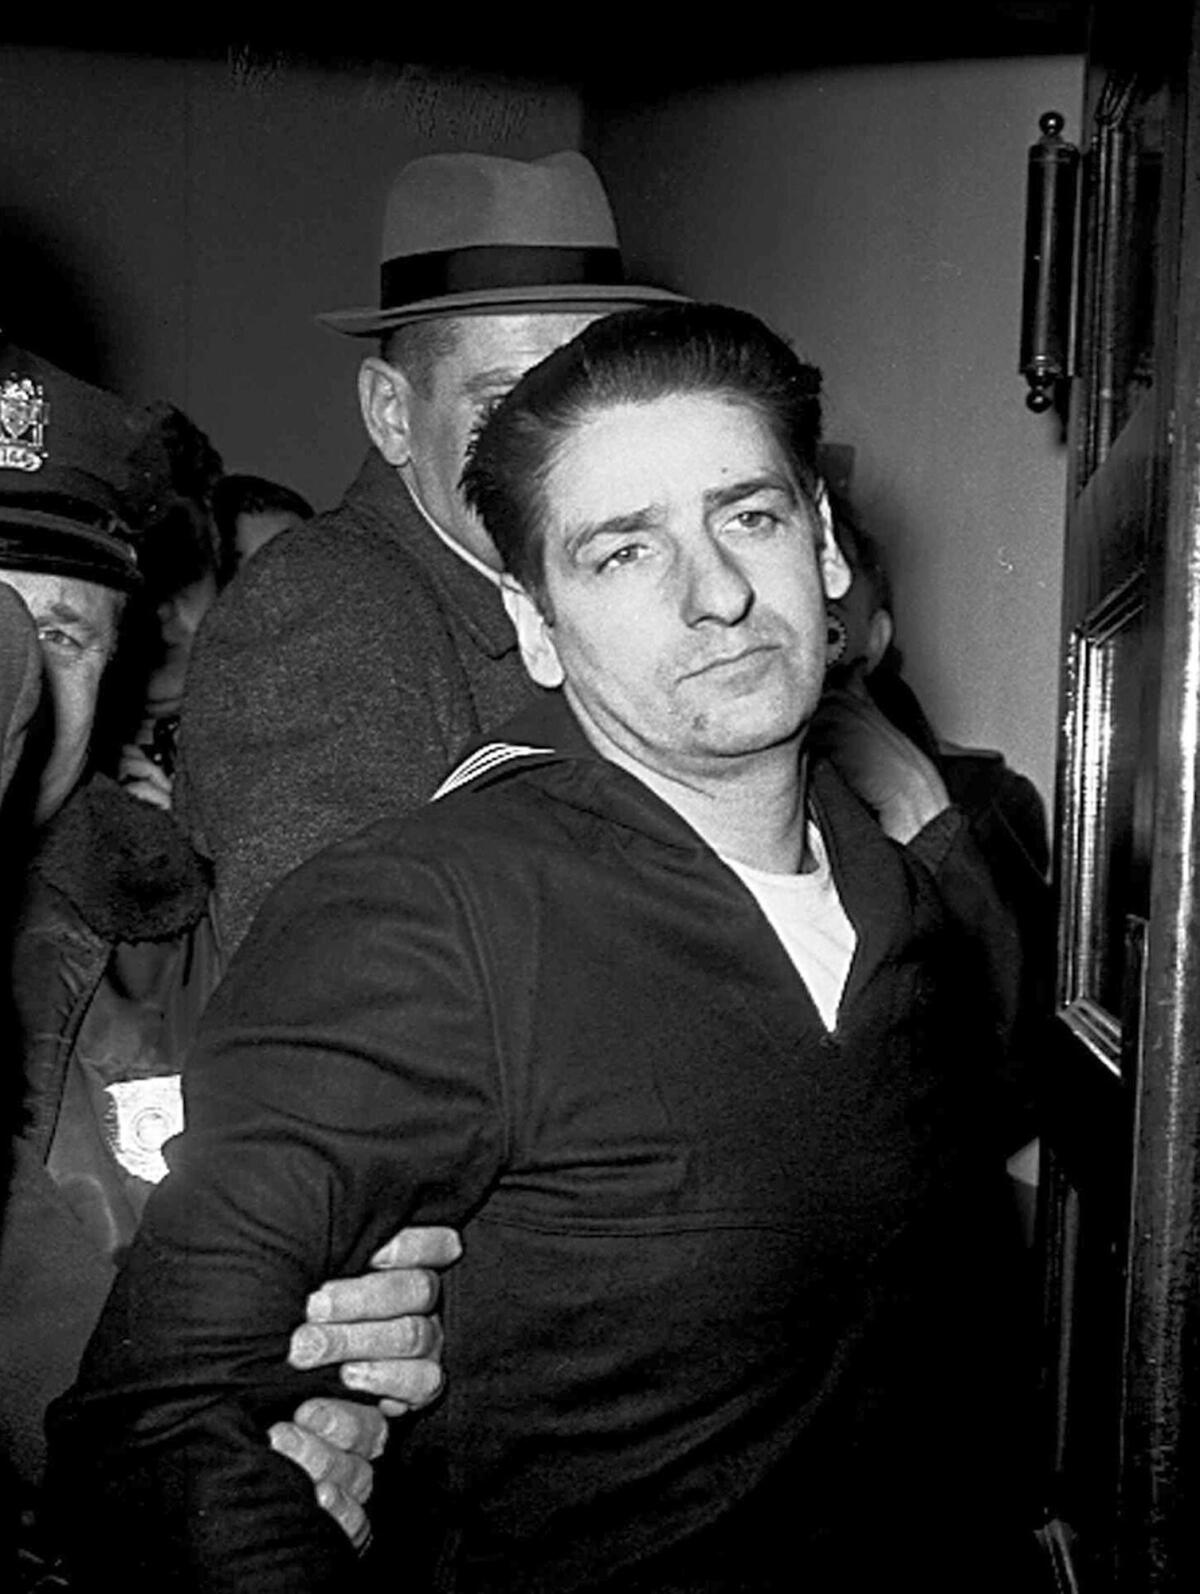 Self-confessed Boston Strangler Albert DeSalvo is seen minutes after his capture in Boston in 1967. Authorities say DNA tests on the remains of DeSalvo confirm he killed Mary Sullivan, the woman believed to be the serial killer's last victim.